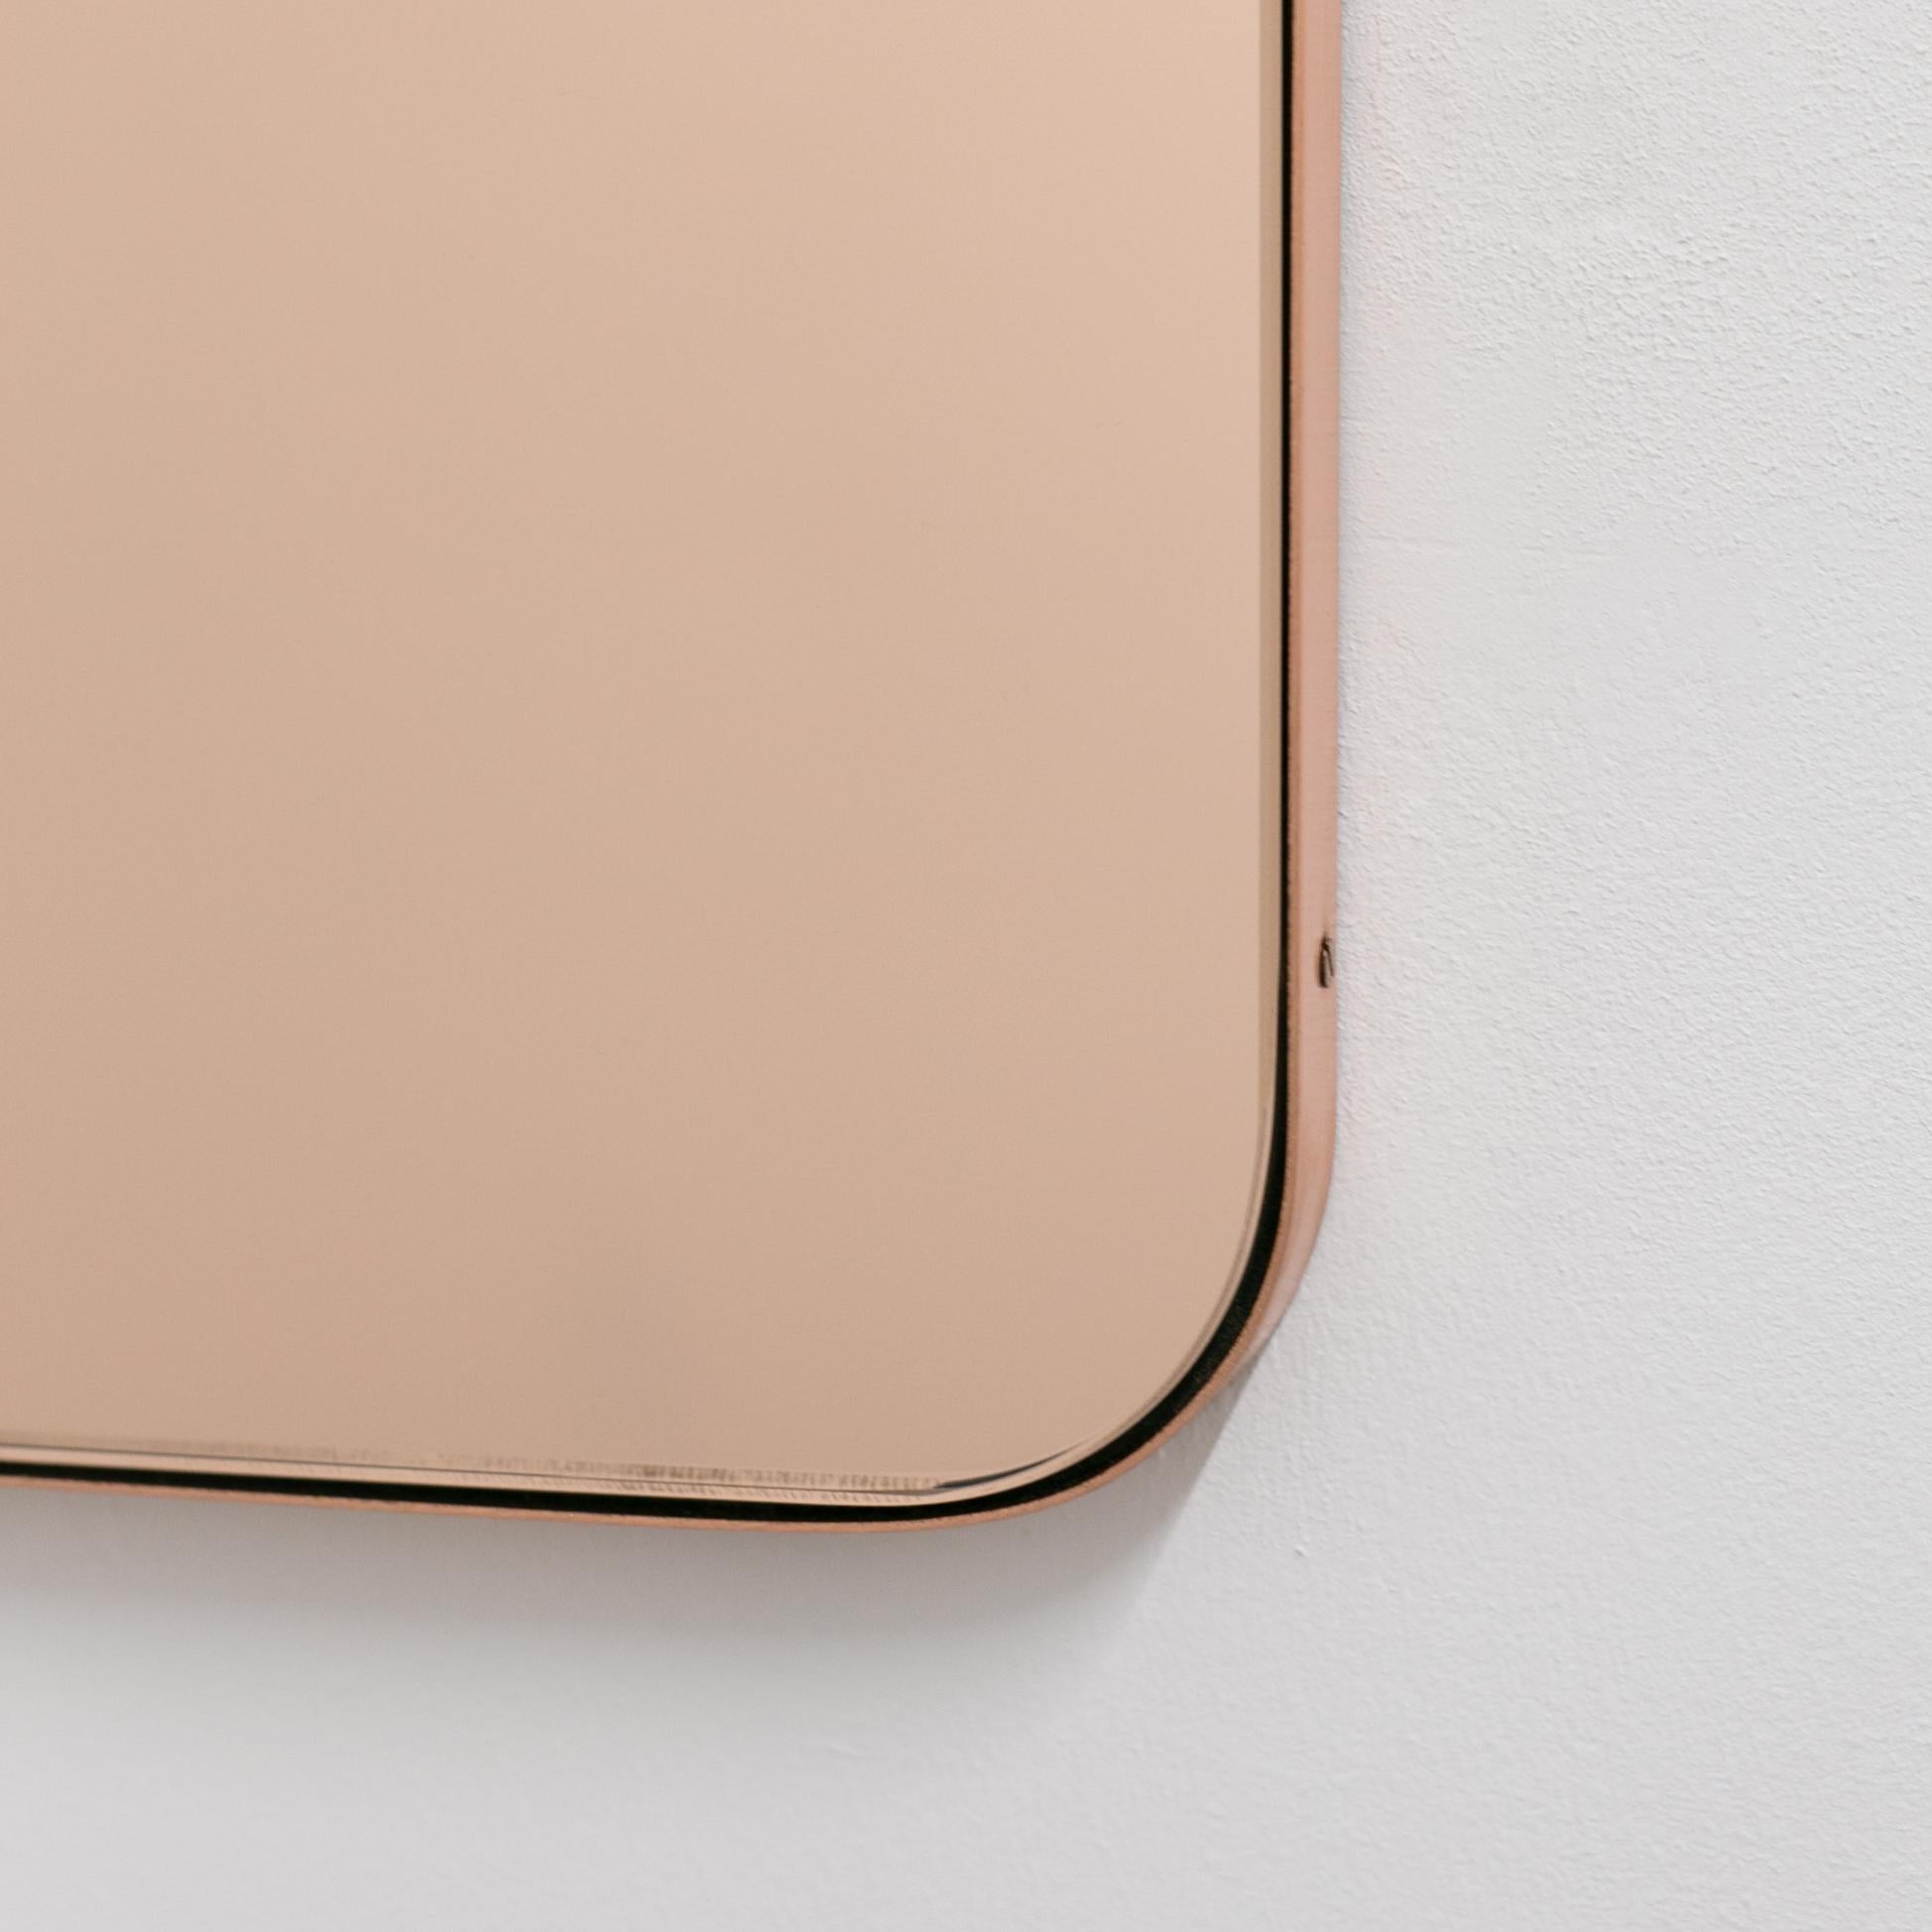 Quadris Rectangular Rose Gold Contemporary Mirror with a Copper Frame, Large In New Condition For Sale In London, GB